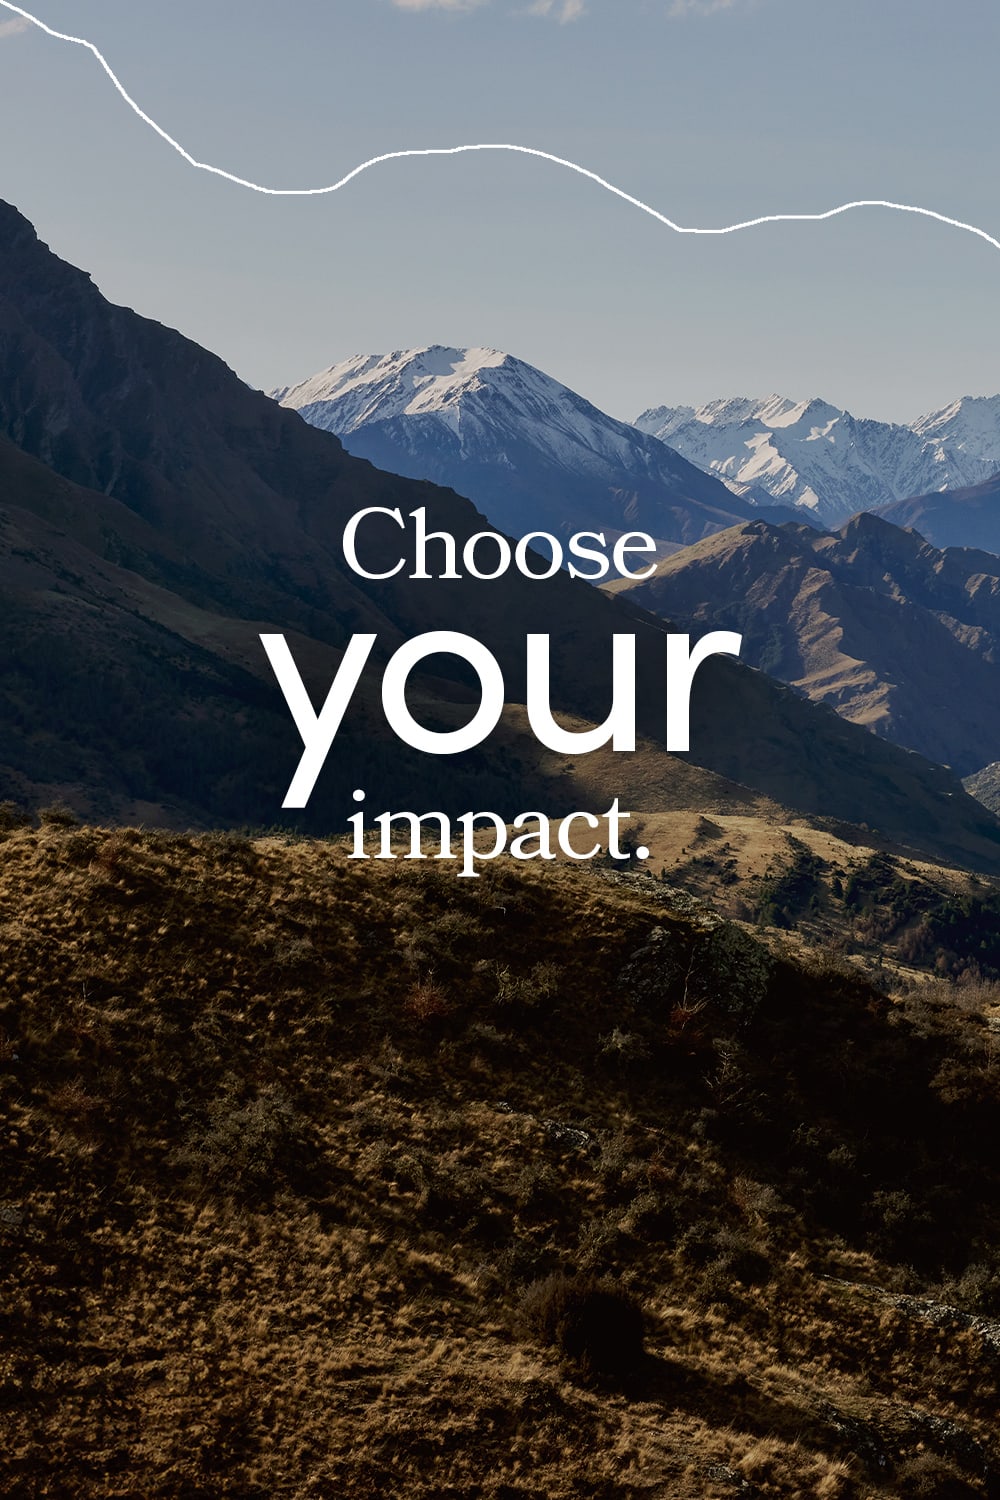 Choose your impact.